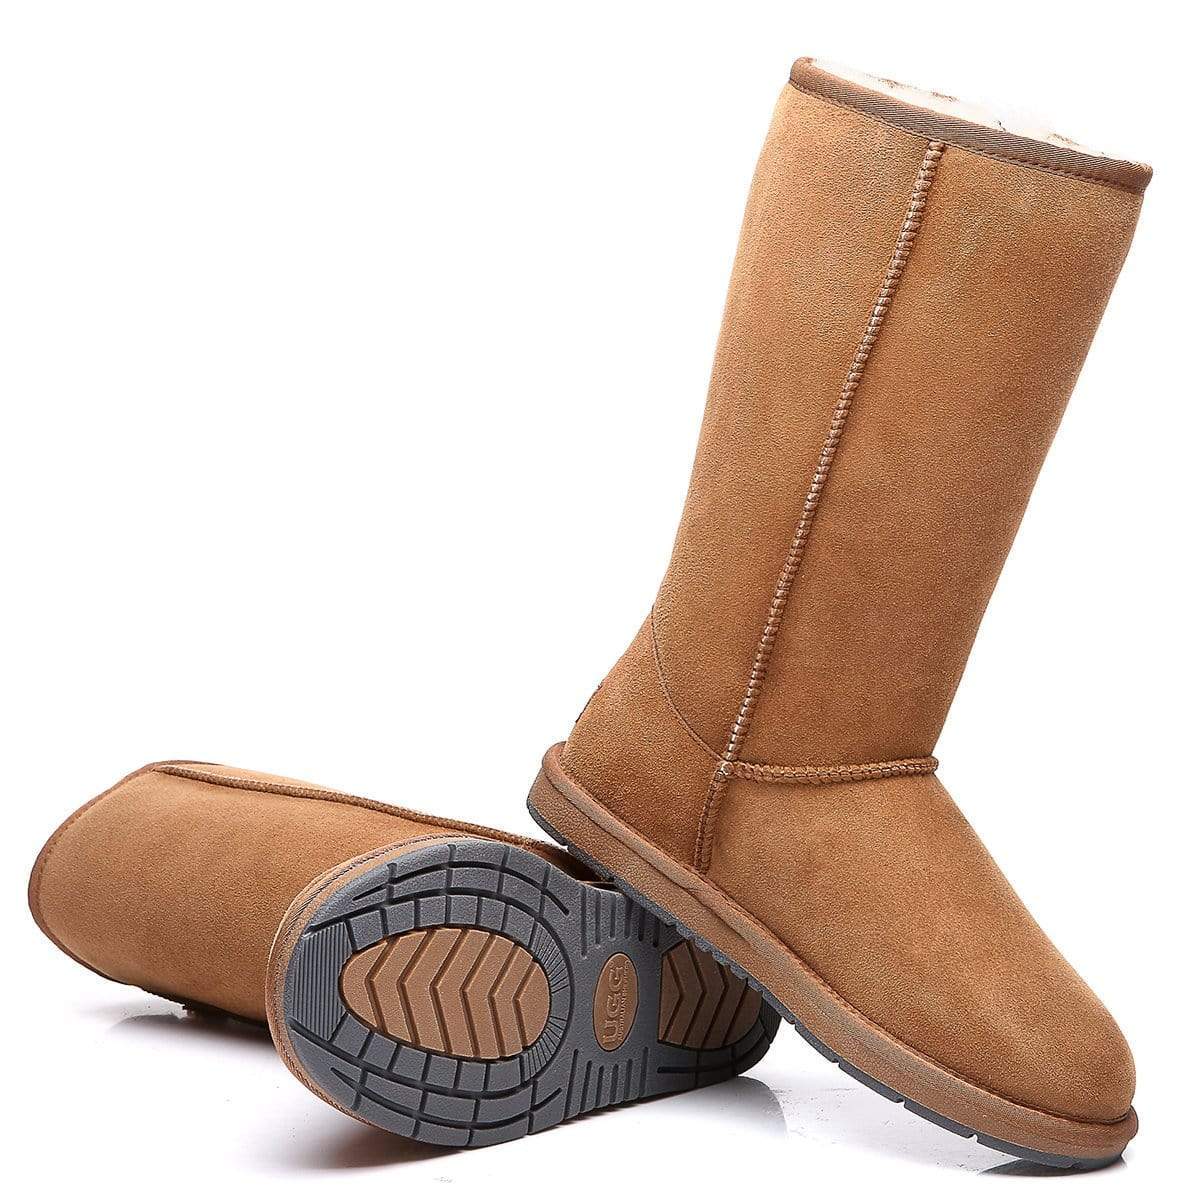 UGG Direct - Tall Side Zip